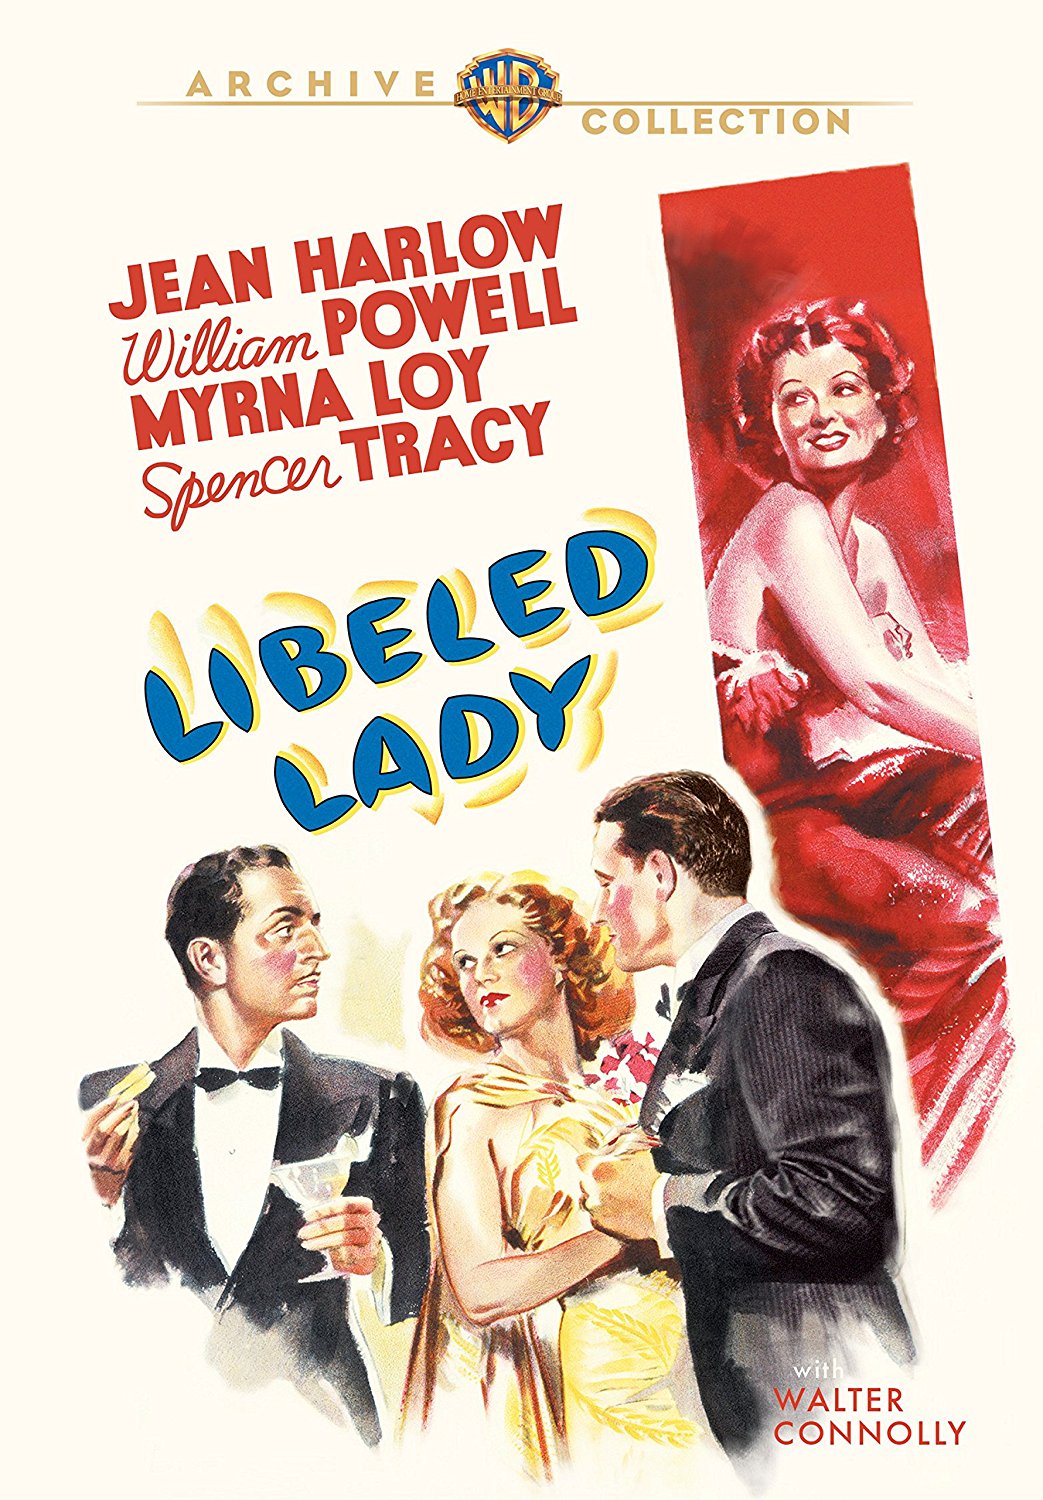 Libeled Lady (1936) starring Spencer Tracy, Myrna Loy, William Powell, Jean Harlow